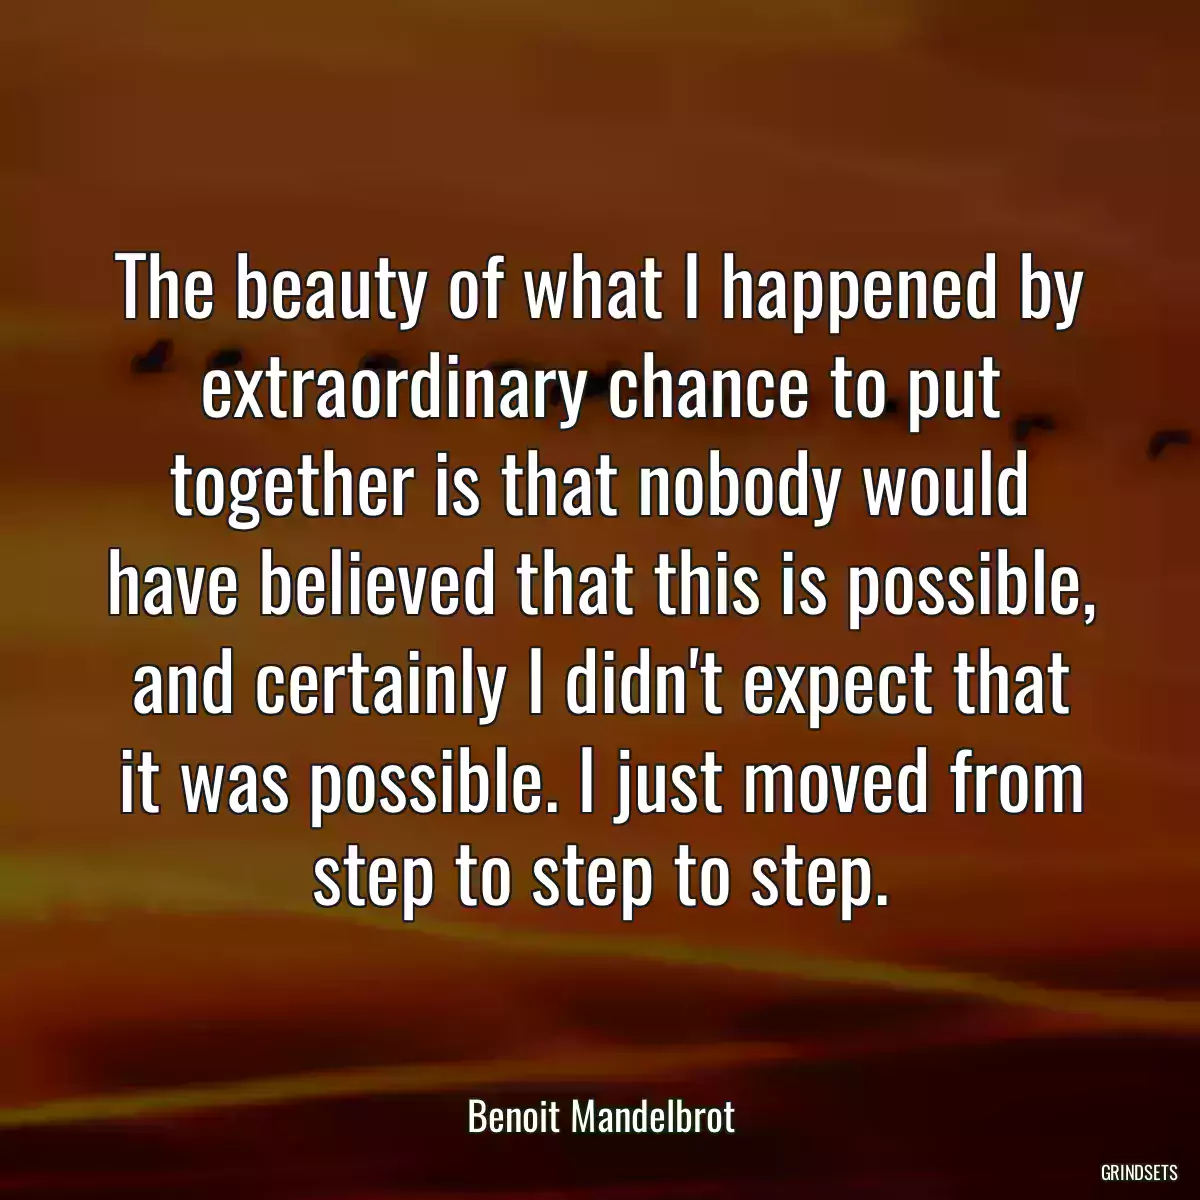 The beauty of what I happened by extraordinary chance to put together is that nobody would have believed that this is possible, and certainly I didn\'t expect that it was possible. I just moved from step to step to step.